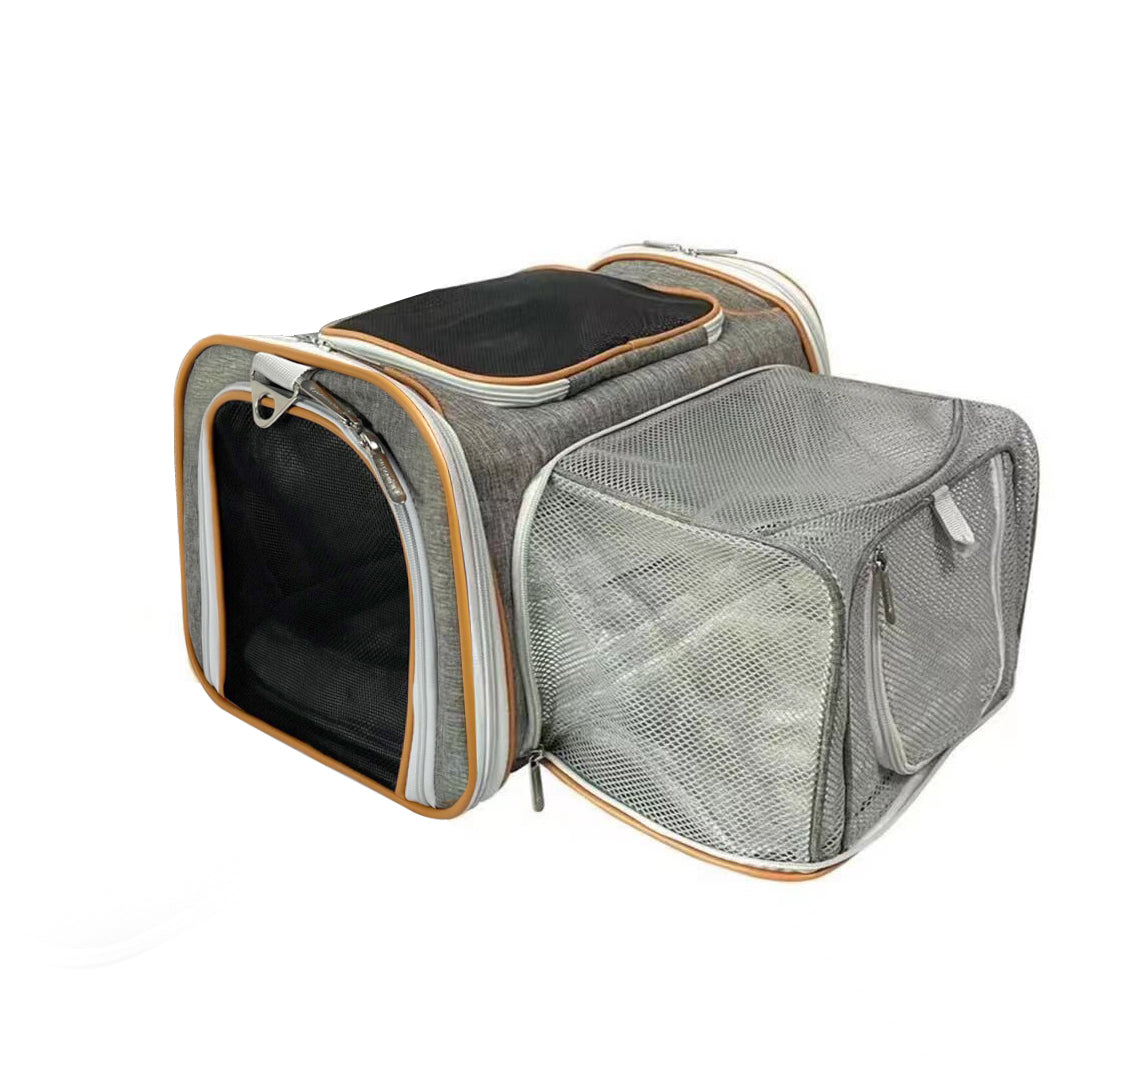 Litake Airline Approved Pet Carrier,4 Sides Expandable Carrier Bag with  Fleece Pad,Portable Pet Travel Carrier Car Train Travel TSA Soft Sided  Collapsible Dog Carrier for 2 Cats 